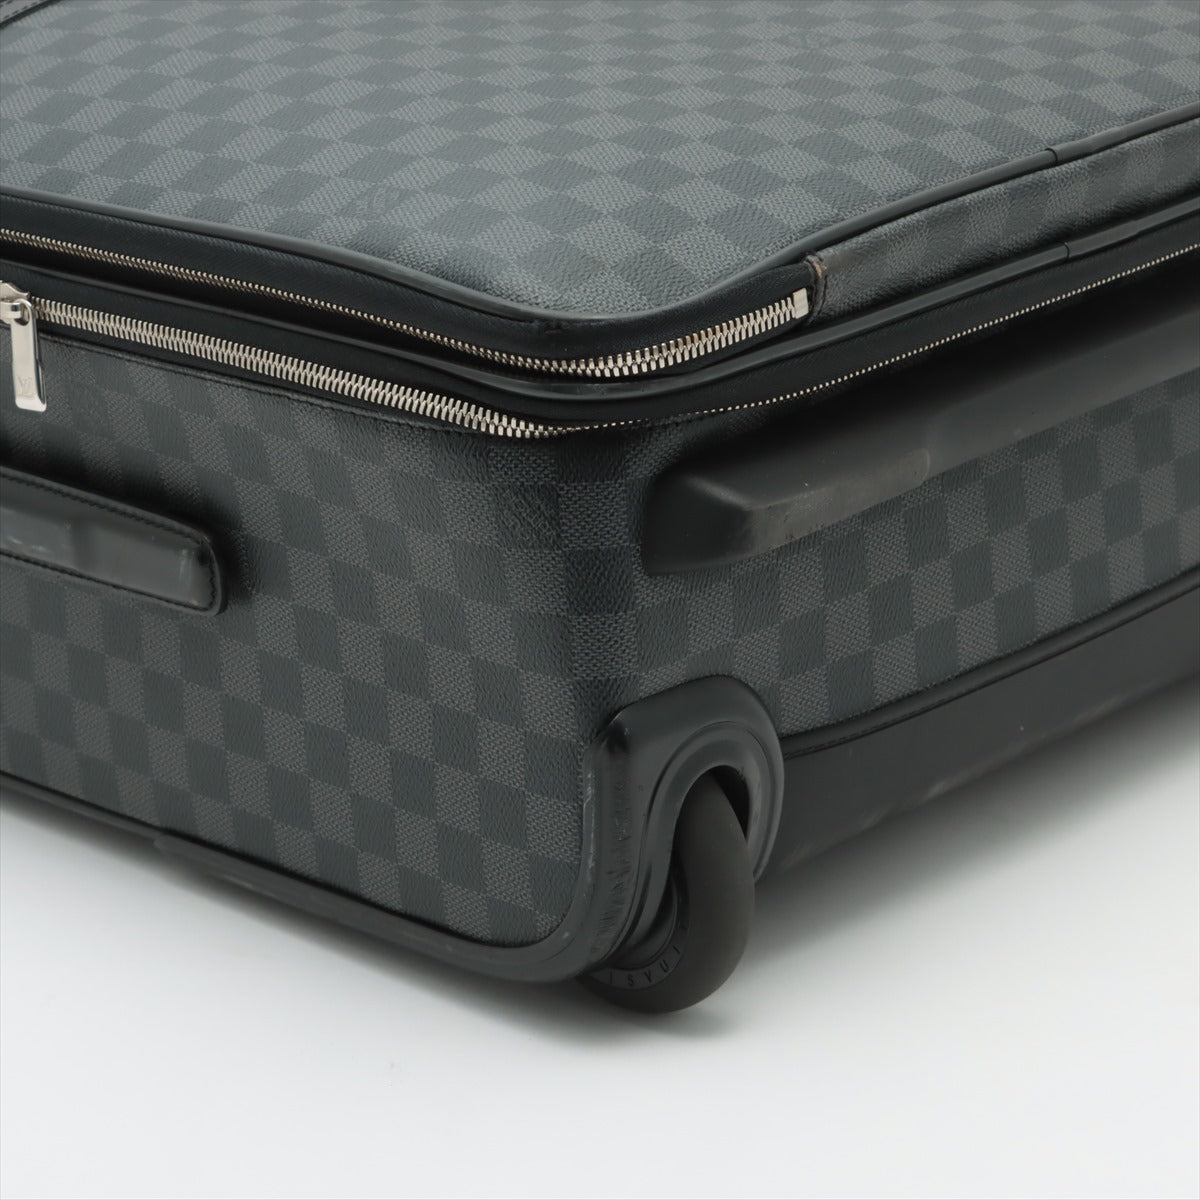 Louis Vuitton Damier Graphite Pegas 55 N41186 with protective cover and garment Name tag with initials